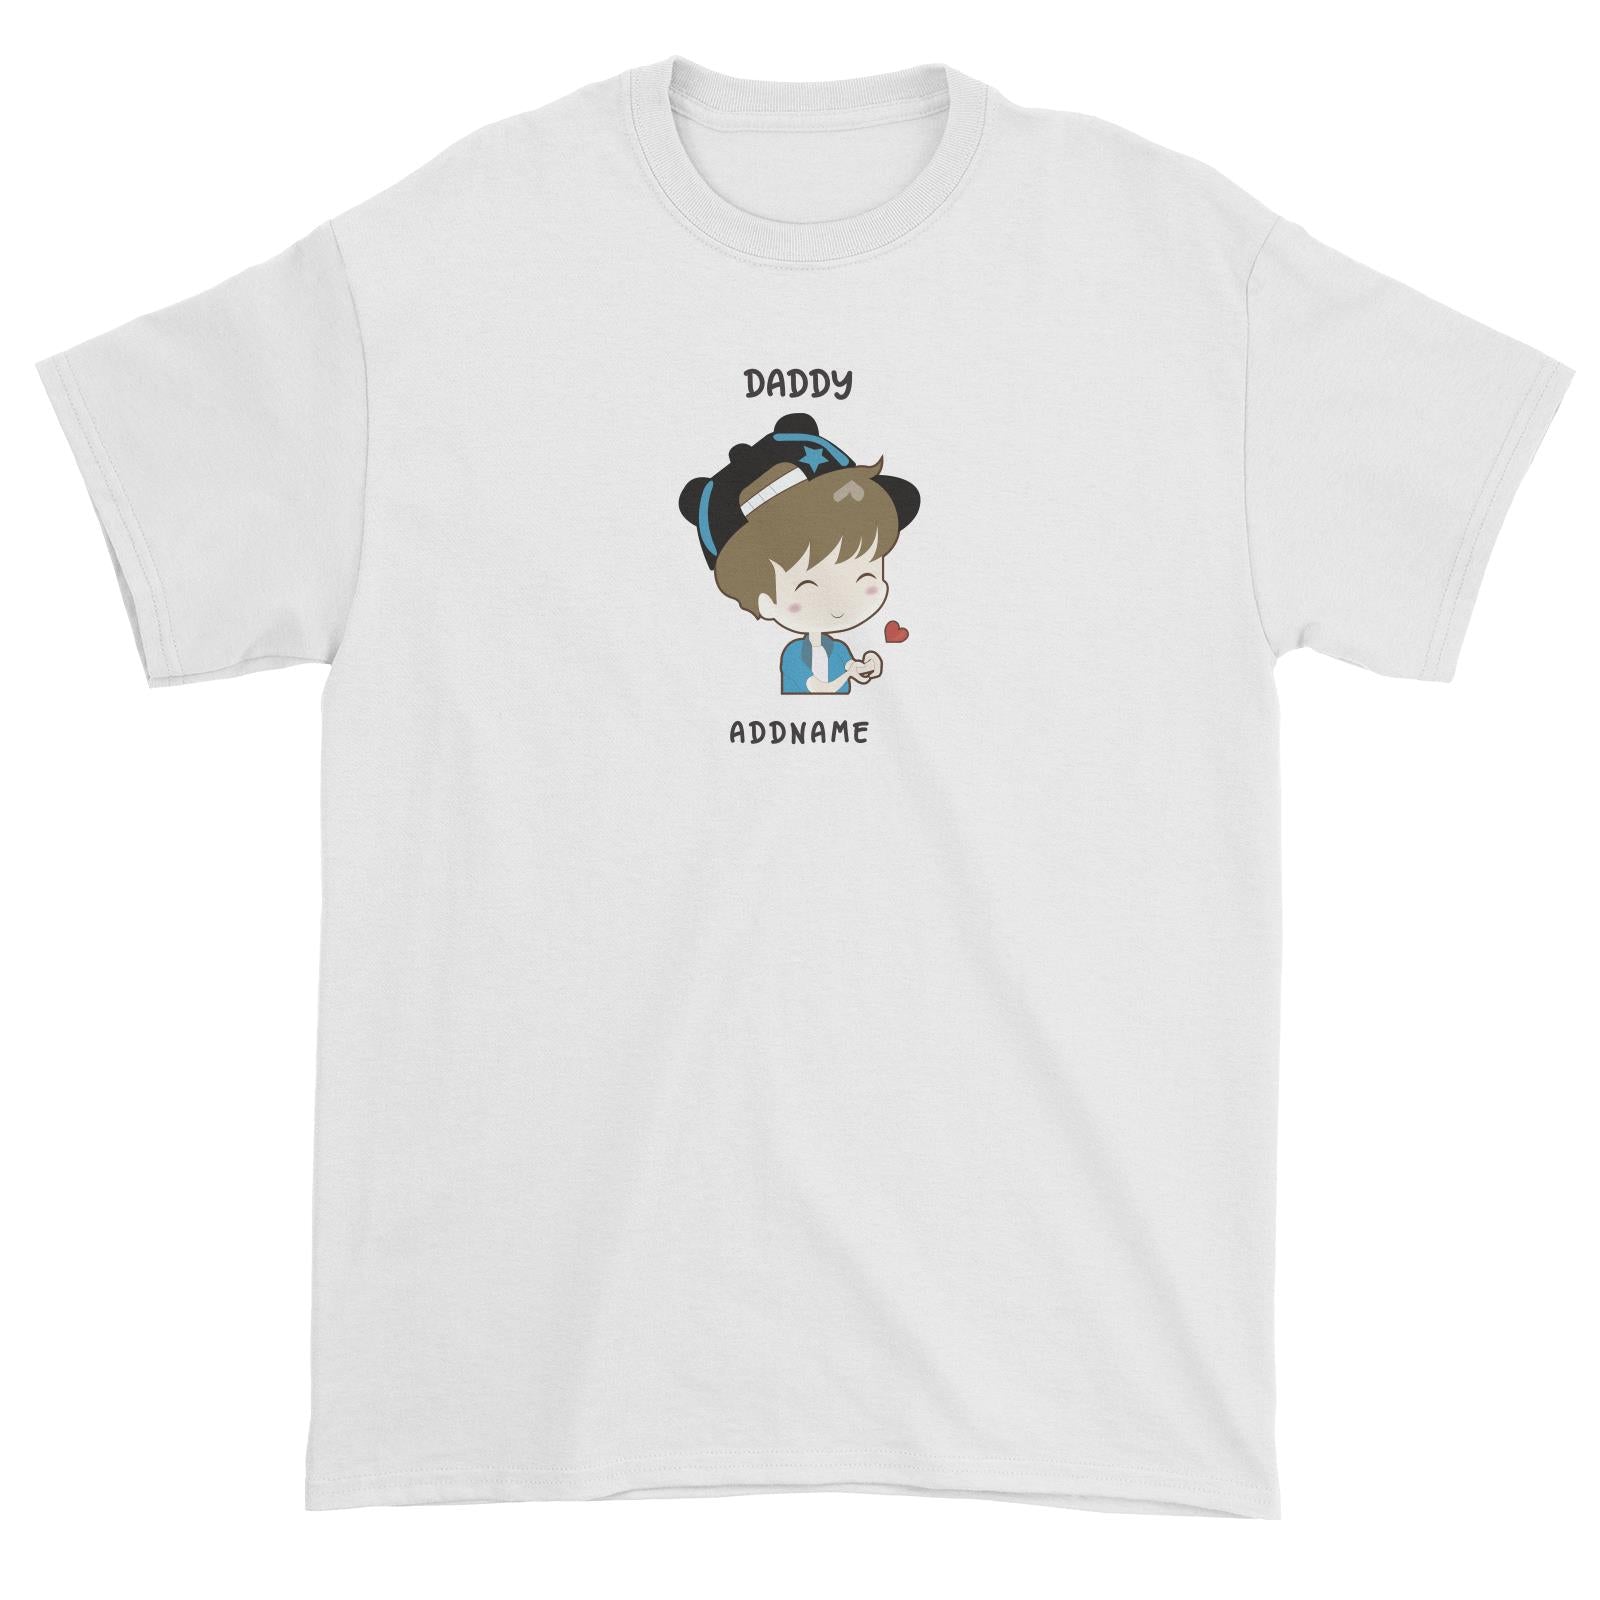 My Lovely Family Series Daddy Addname Unisex T-Shirt (FLASH DEAL)